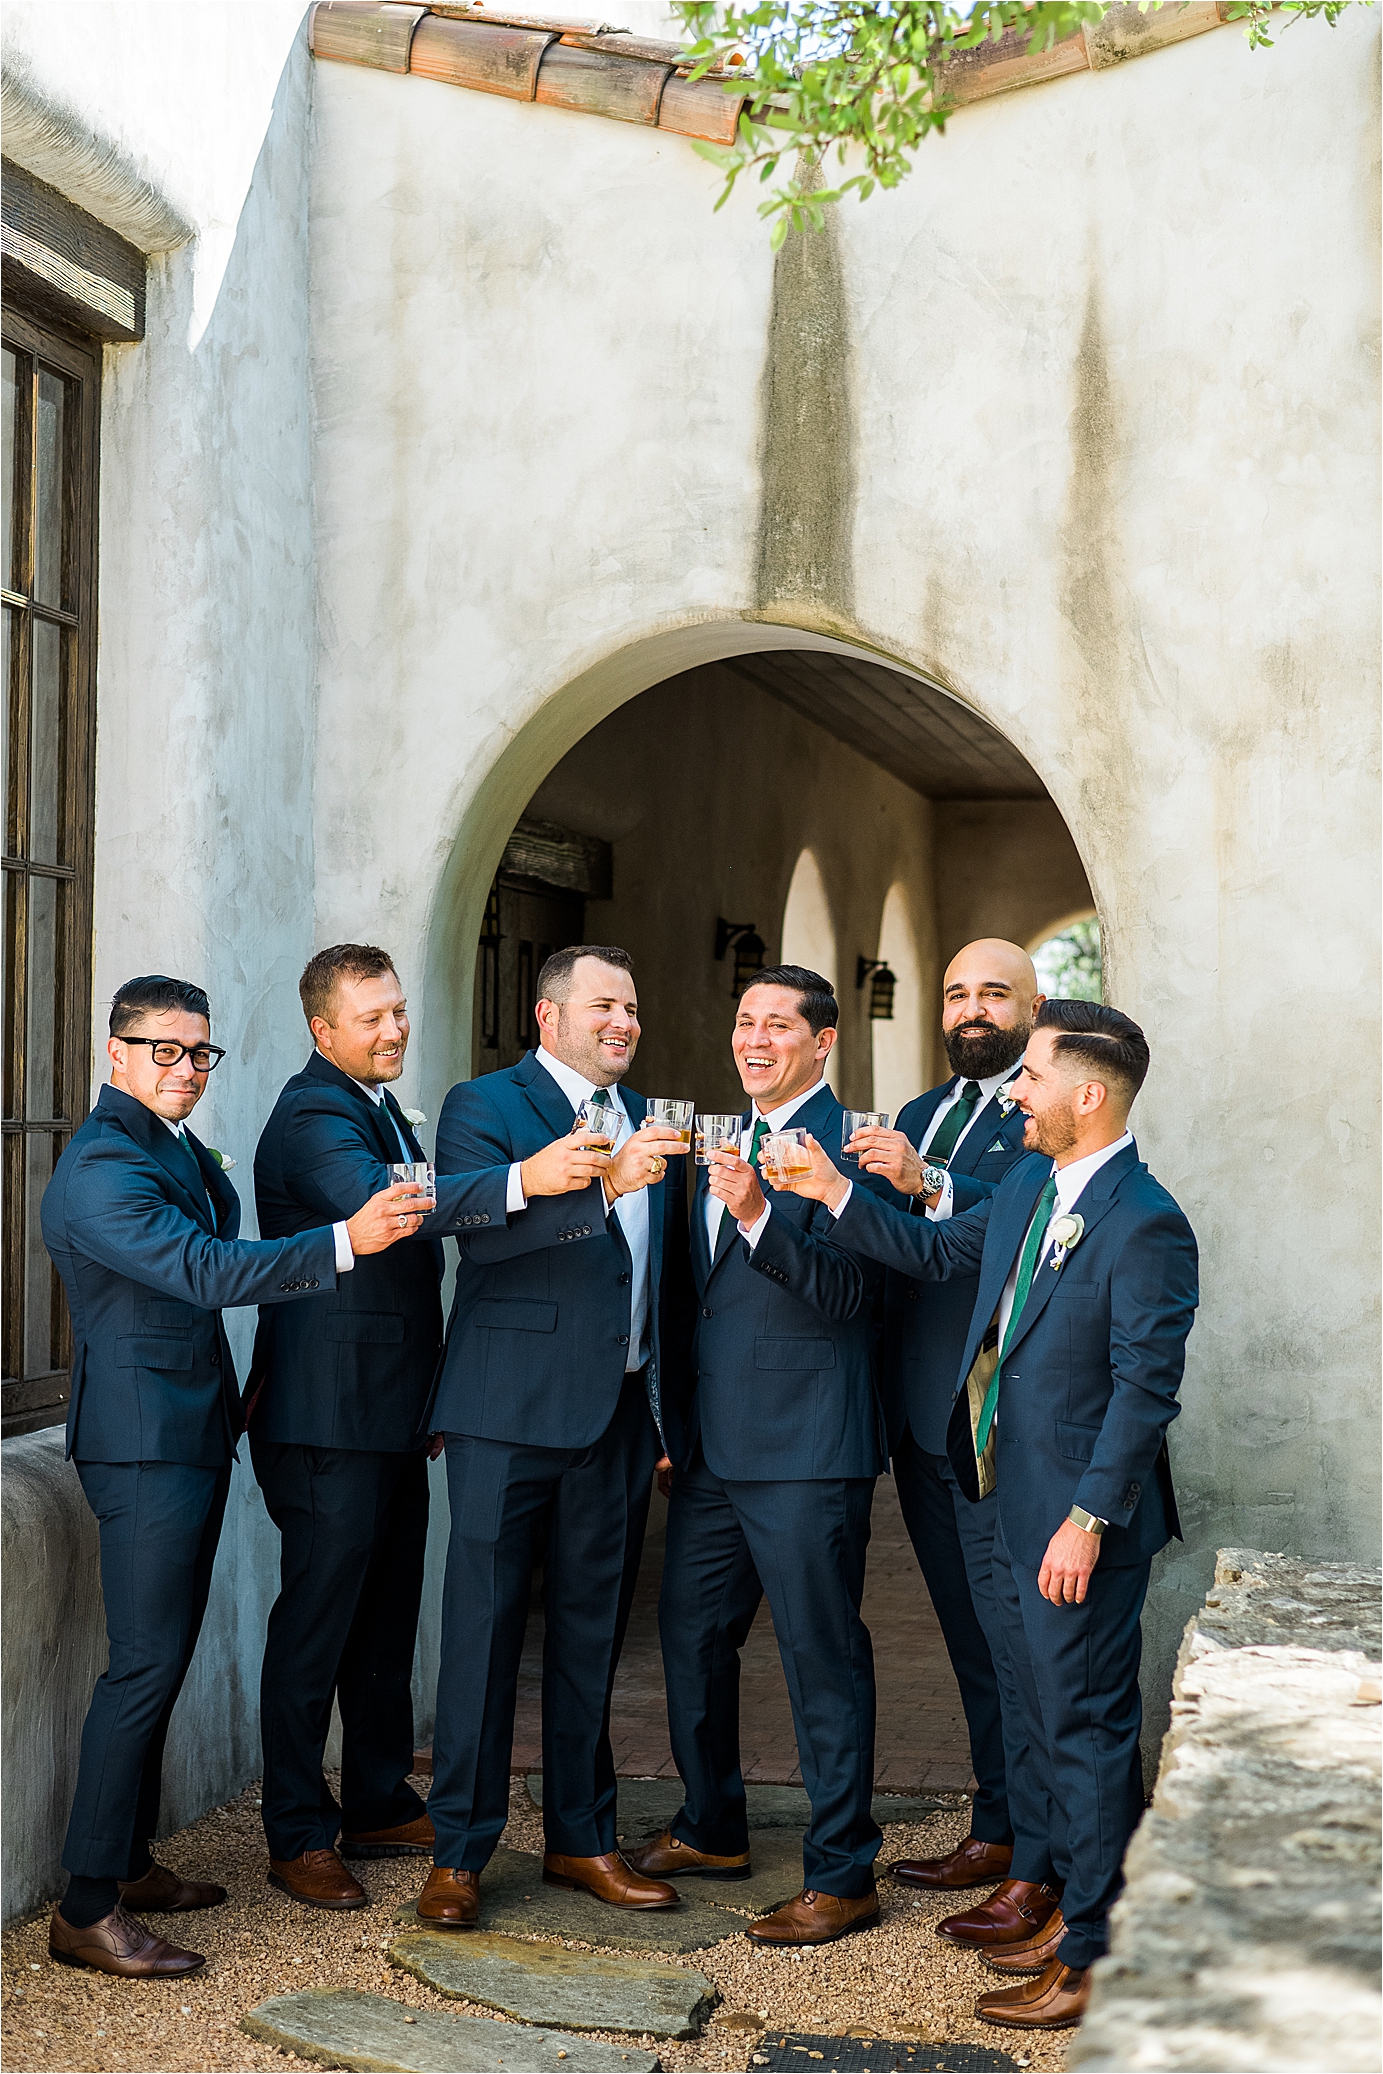 A groom laughs and cheers with his groomsmen on his Lost Mission Wedding Day